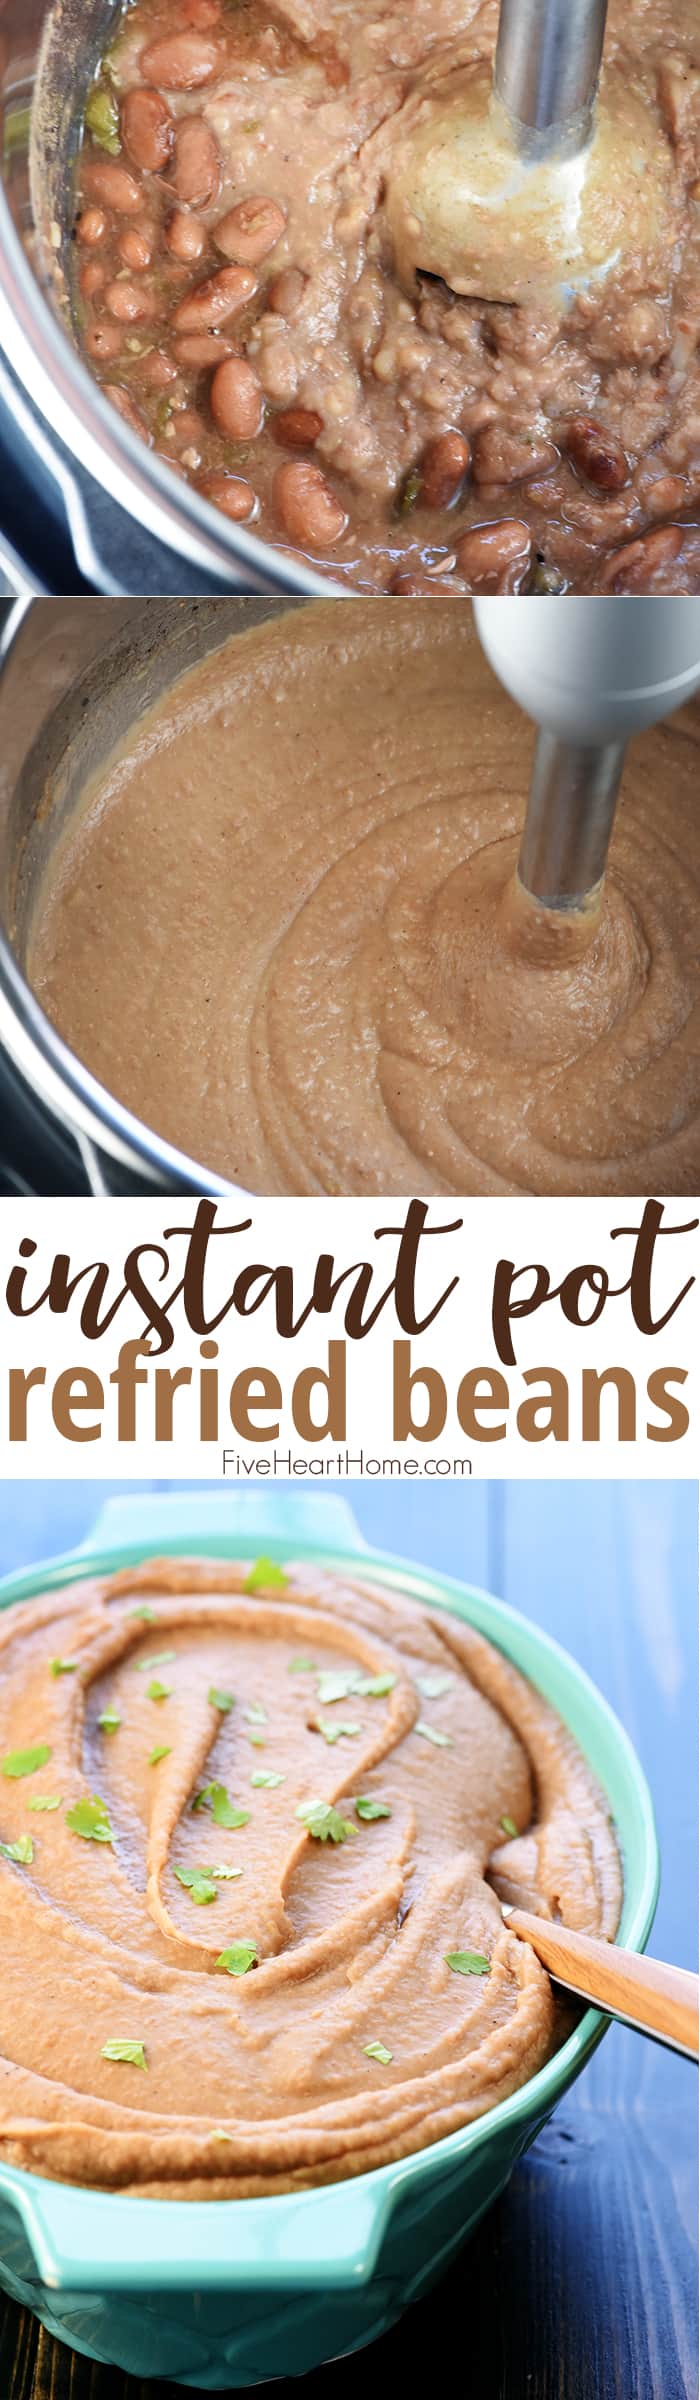 Instant Pot Refried Beans ~ creamy, flavorful, and effortless to make in the pressure cooker...a perfect side dish for all of your favorite Mexican recipes! | FiveHeartHome.com via @fivehearthome